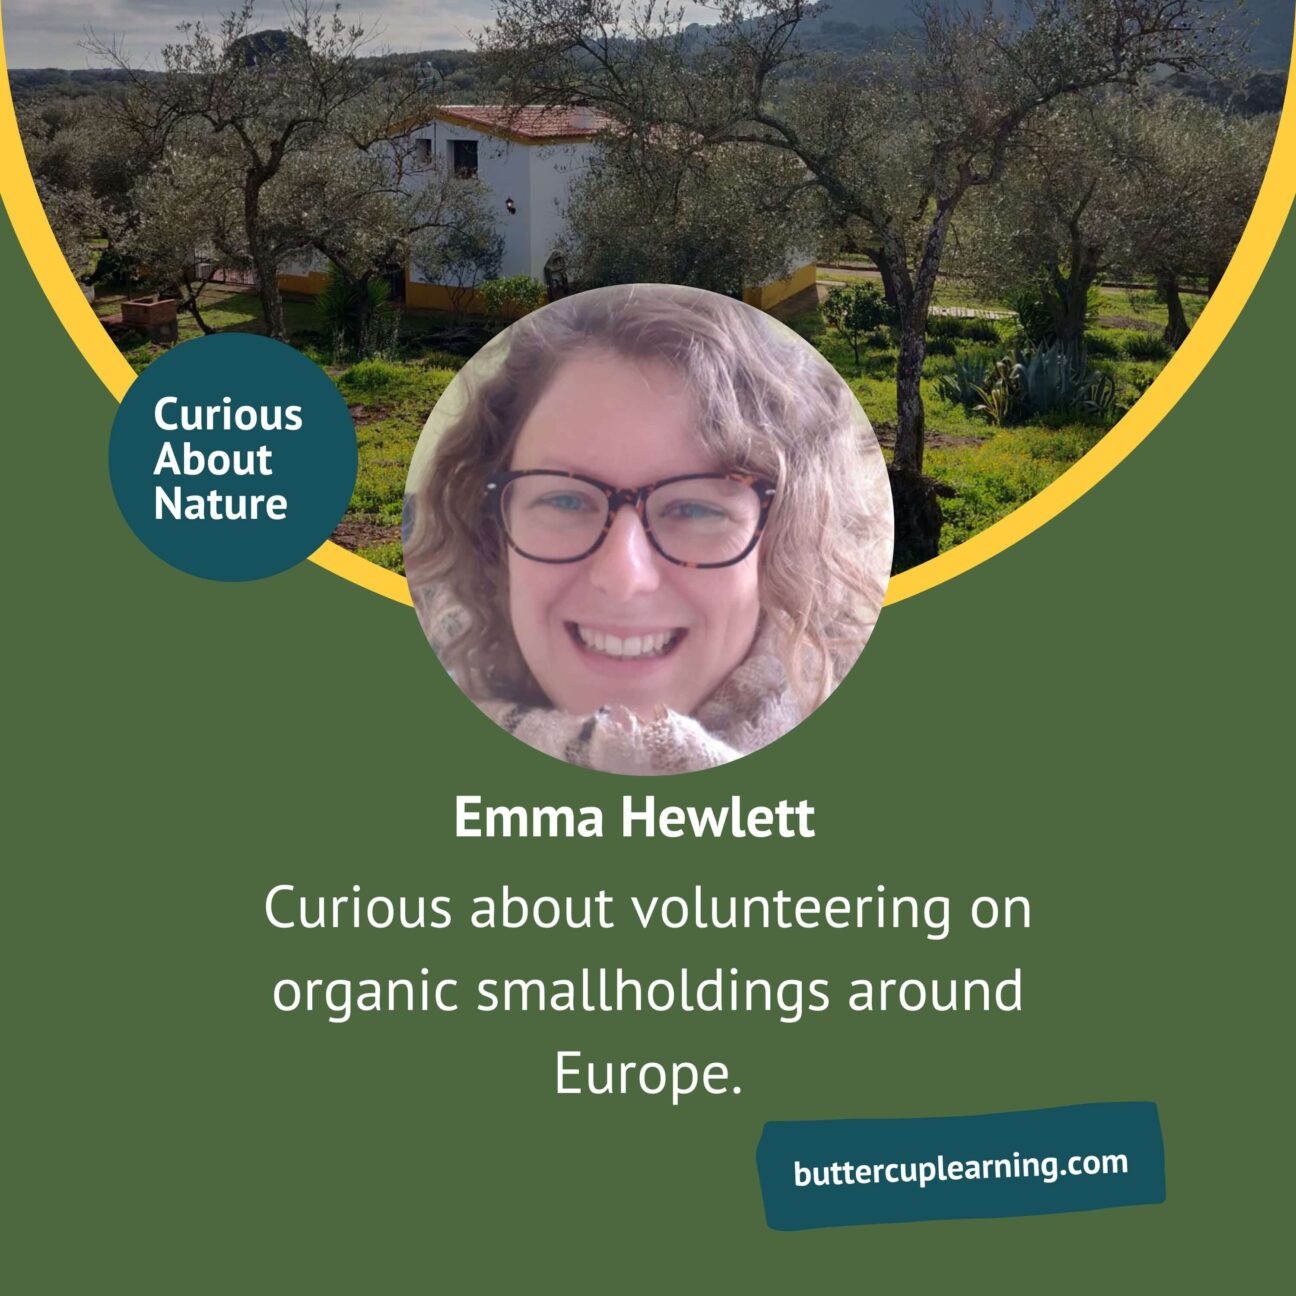 Emma Hewlett, a copy editor and proofreader talks about her family's journey volunteering on organic small holdings around Europe